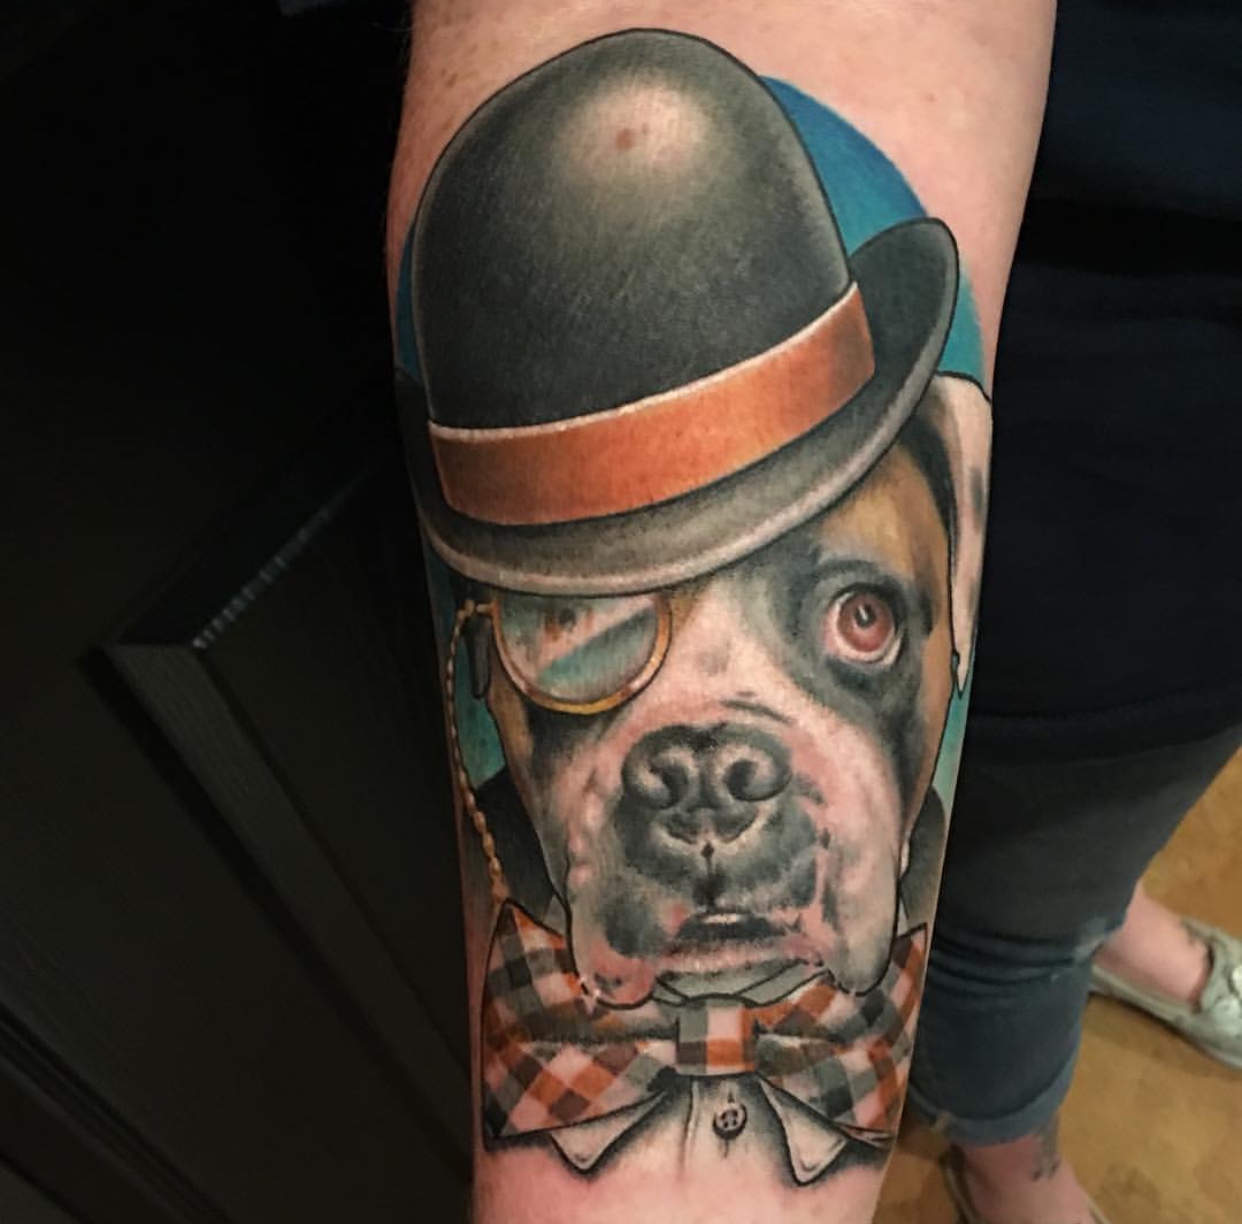 A Boxer wearing a hat realistic tattoo on the forearm